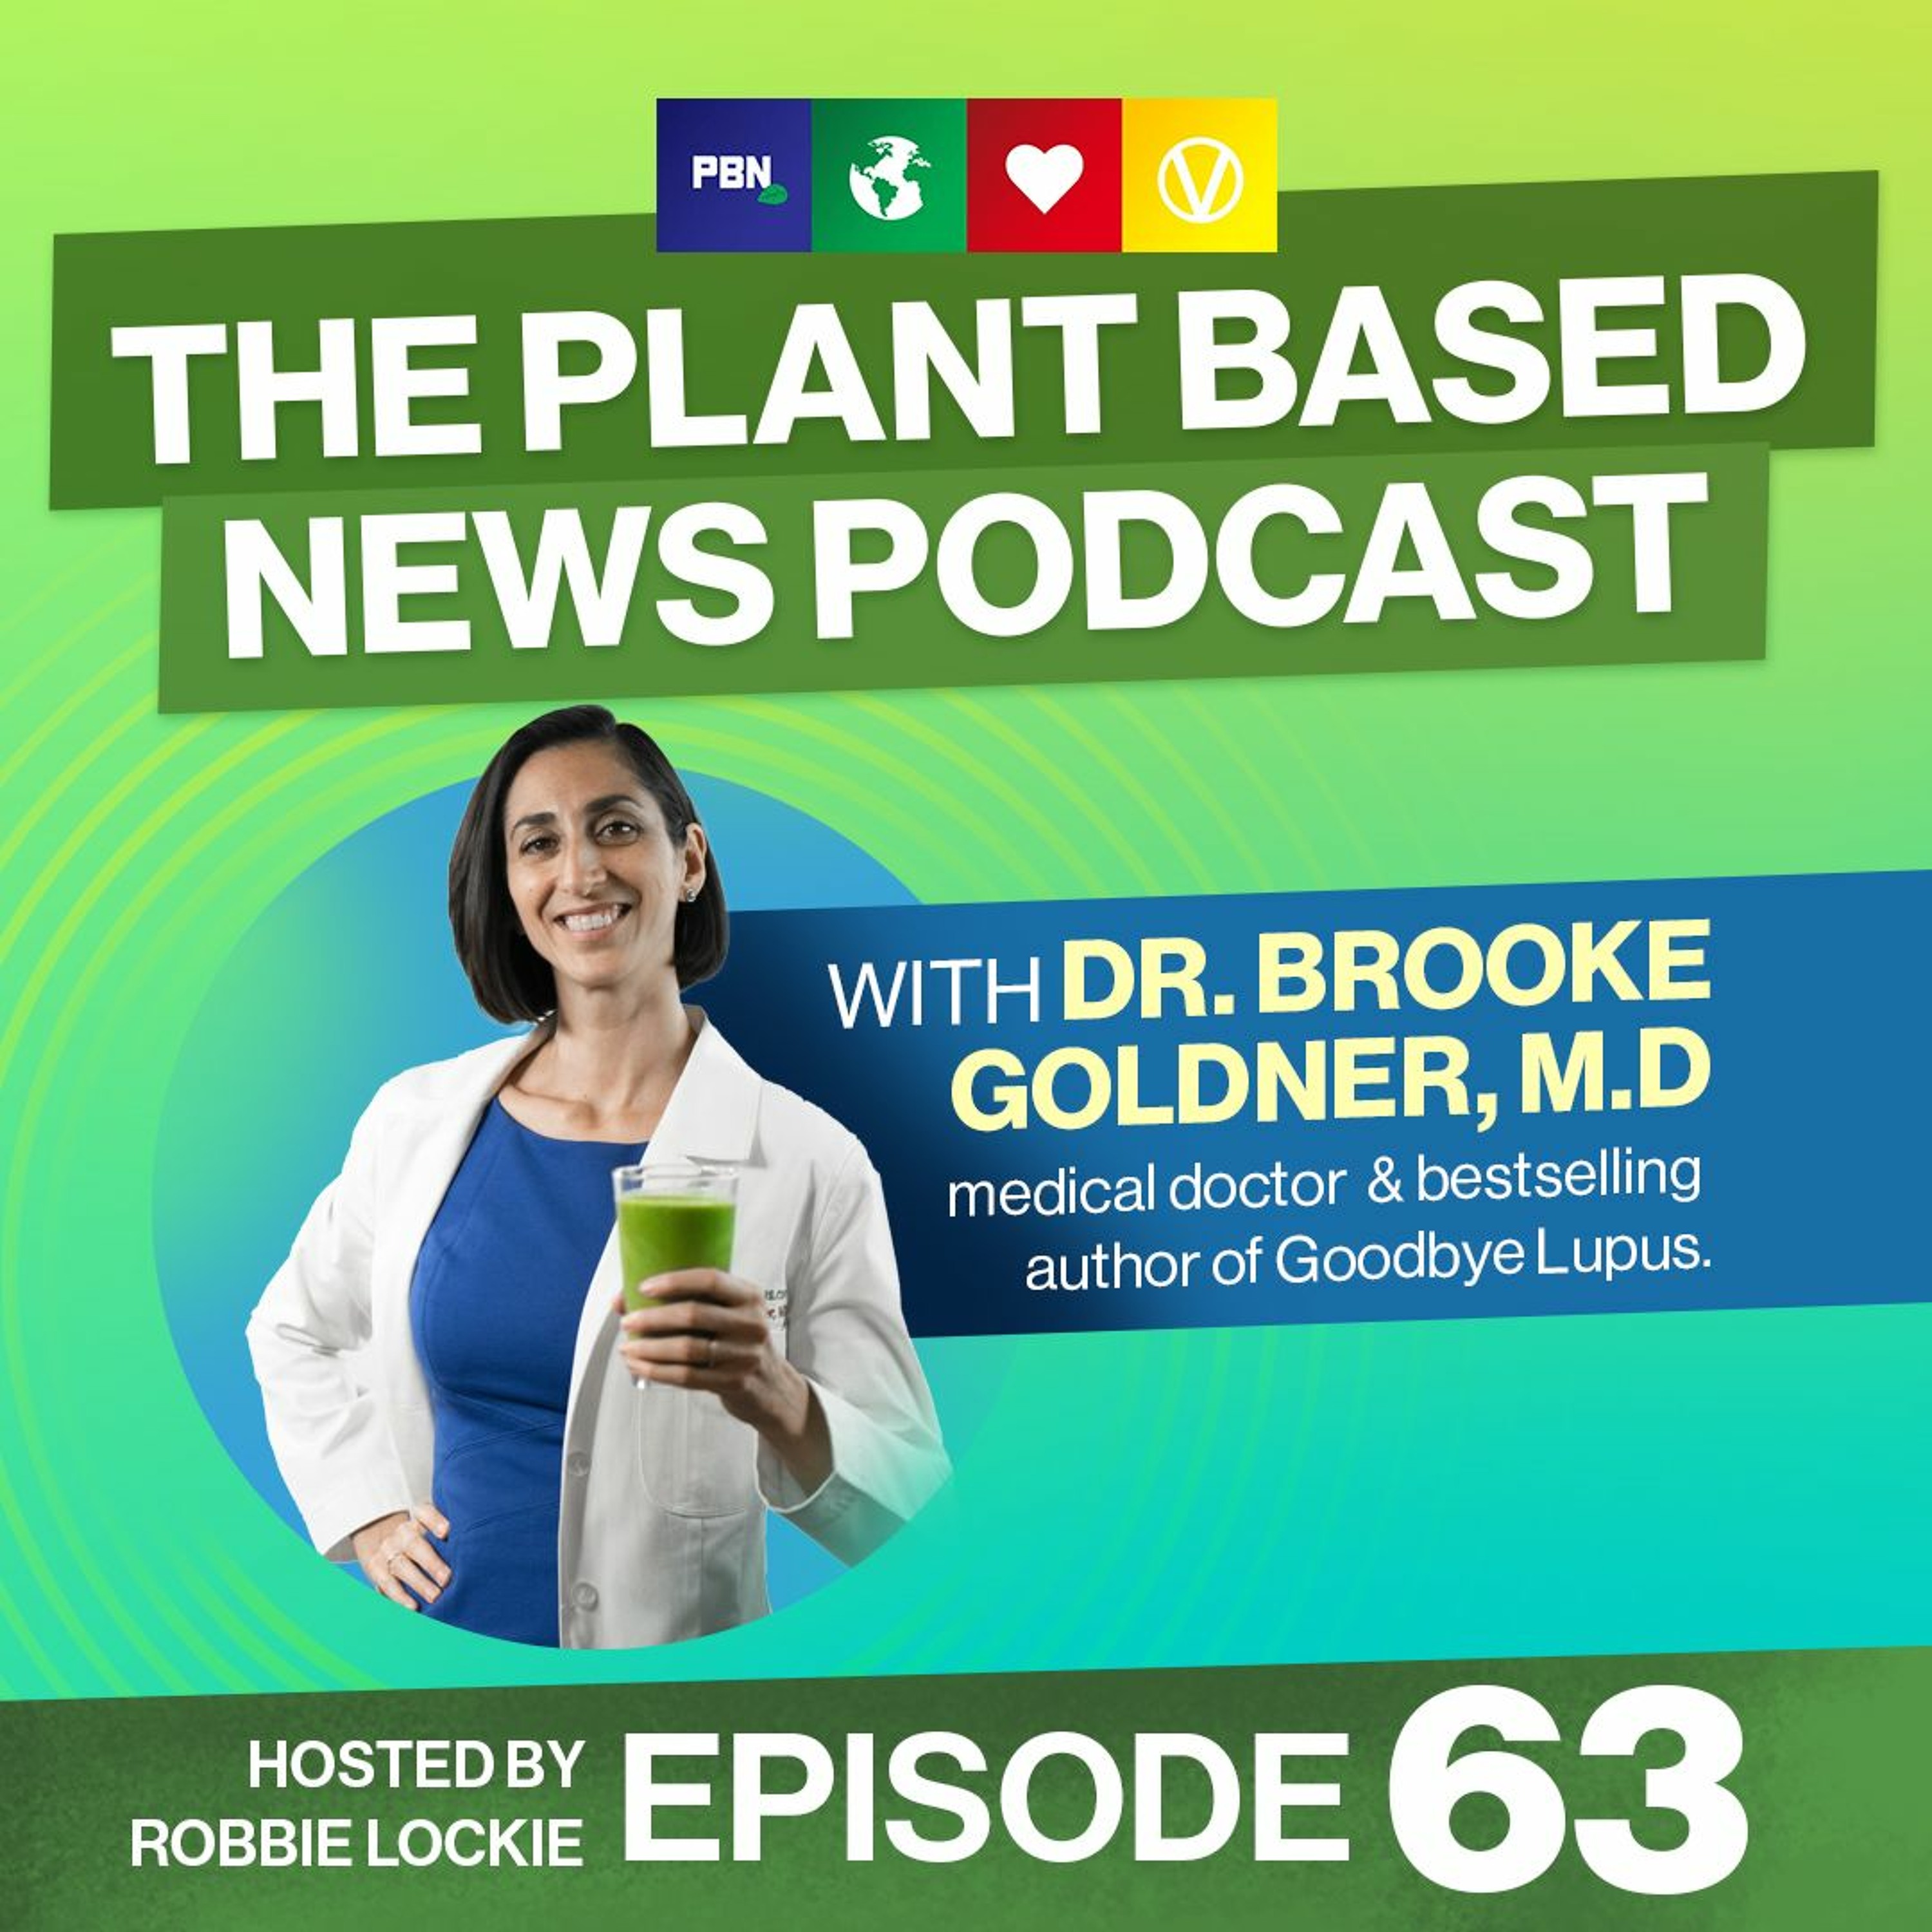 Reversing Long Covid With A Plant-Based Diet & More - Interview /w Dr. Brooke Goldner, MD Ep. 63